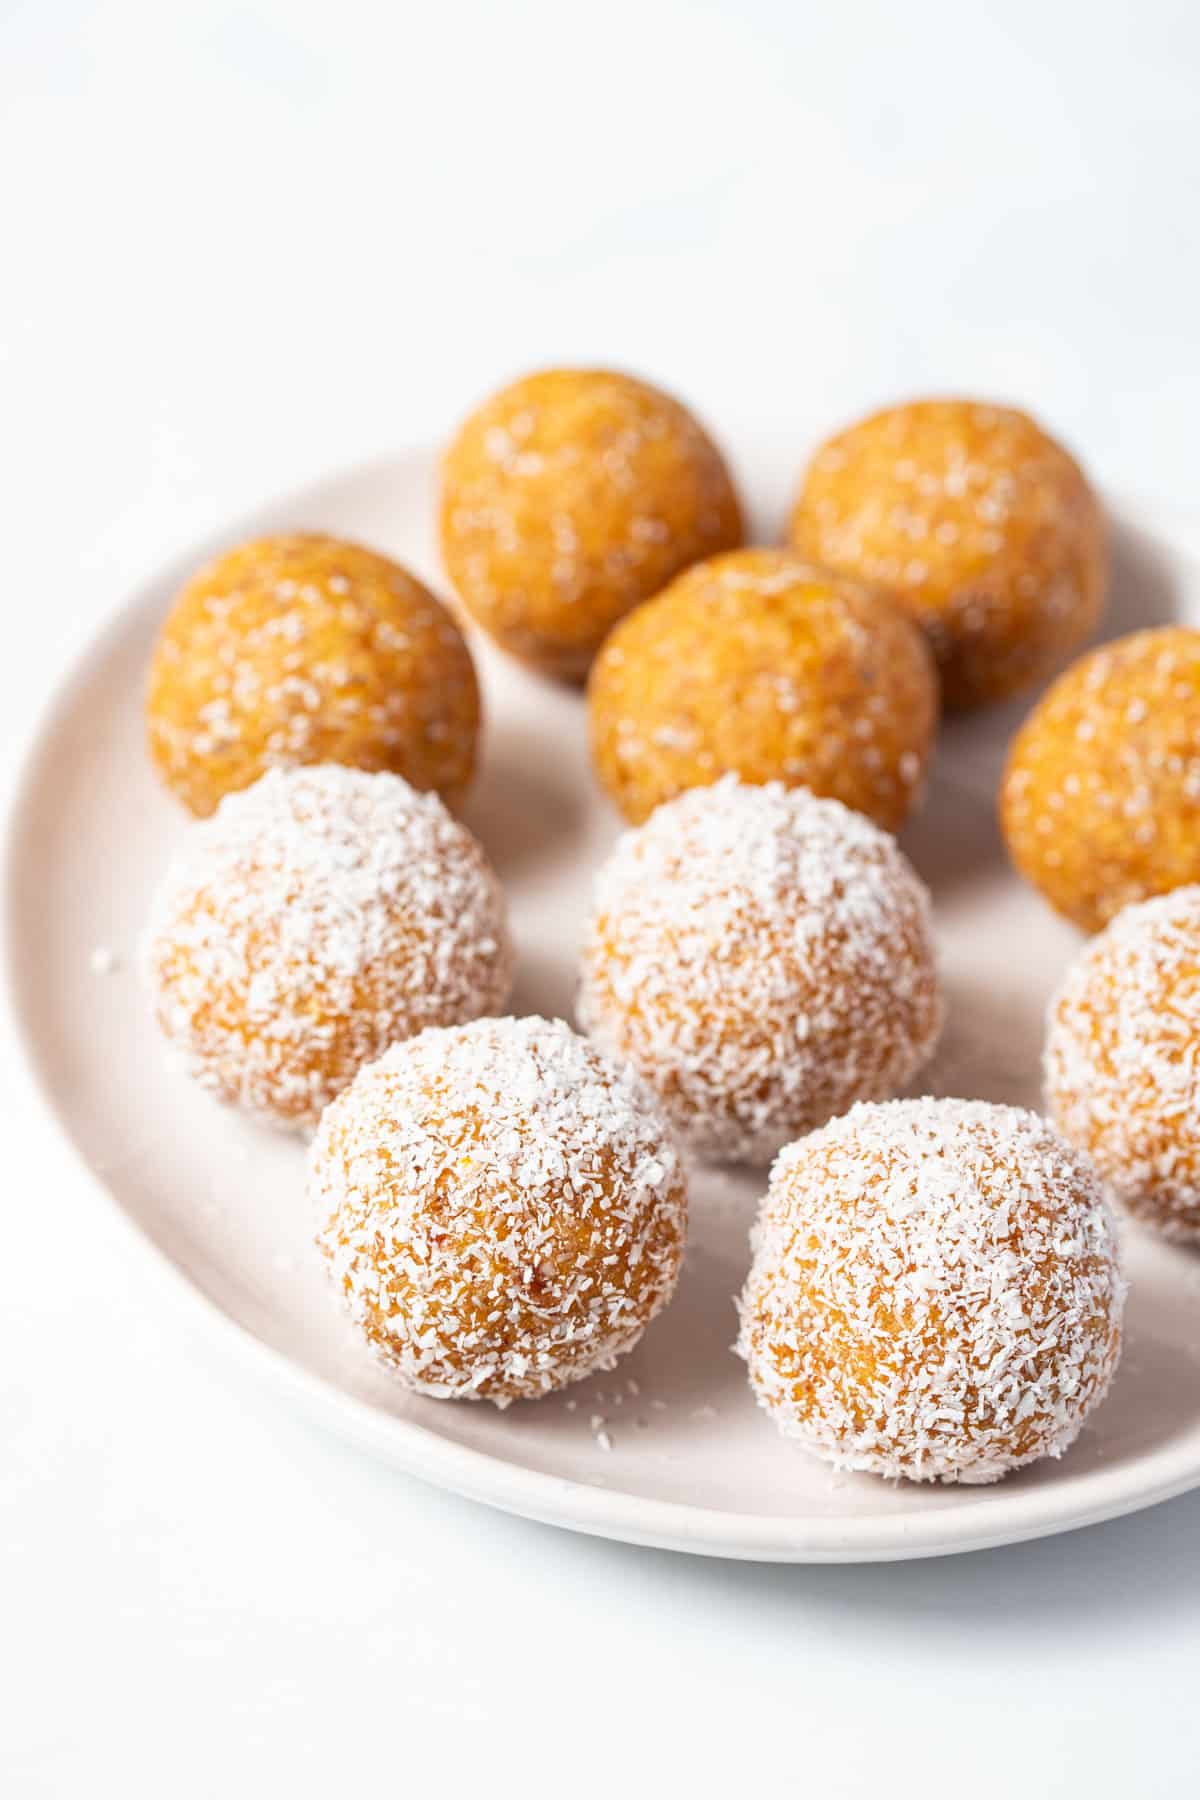 apricot balls rolled in coconut on a white plate.